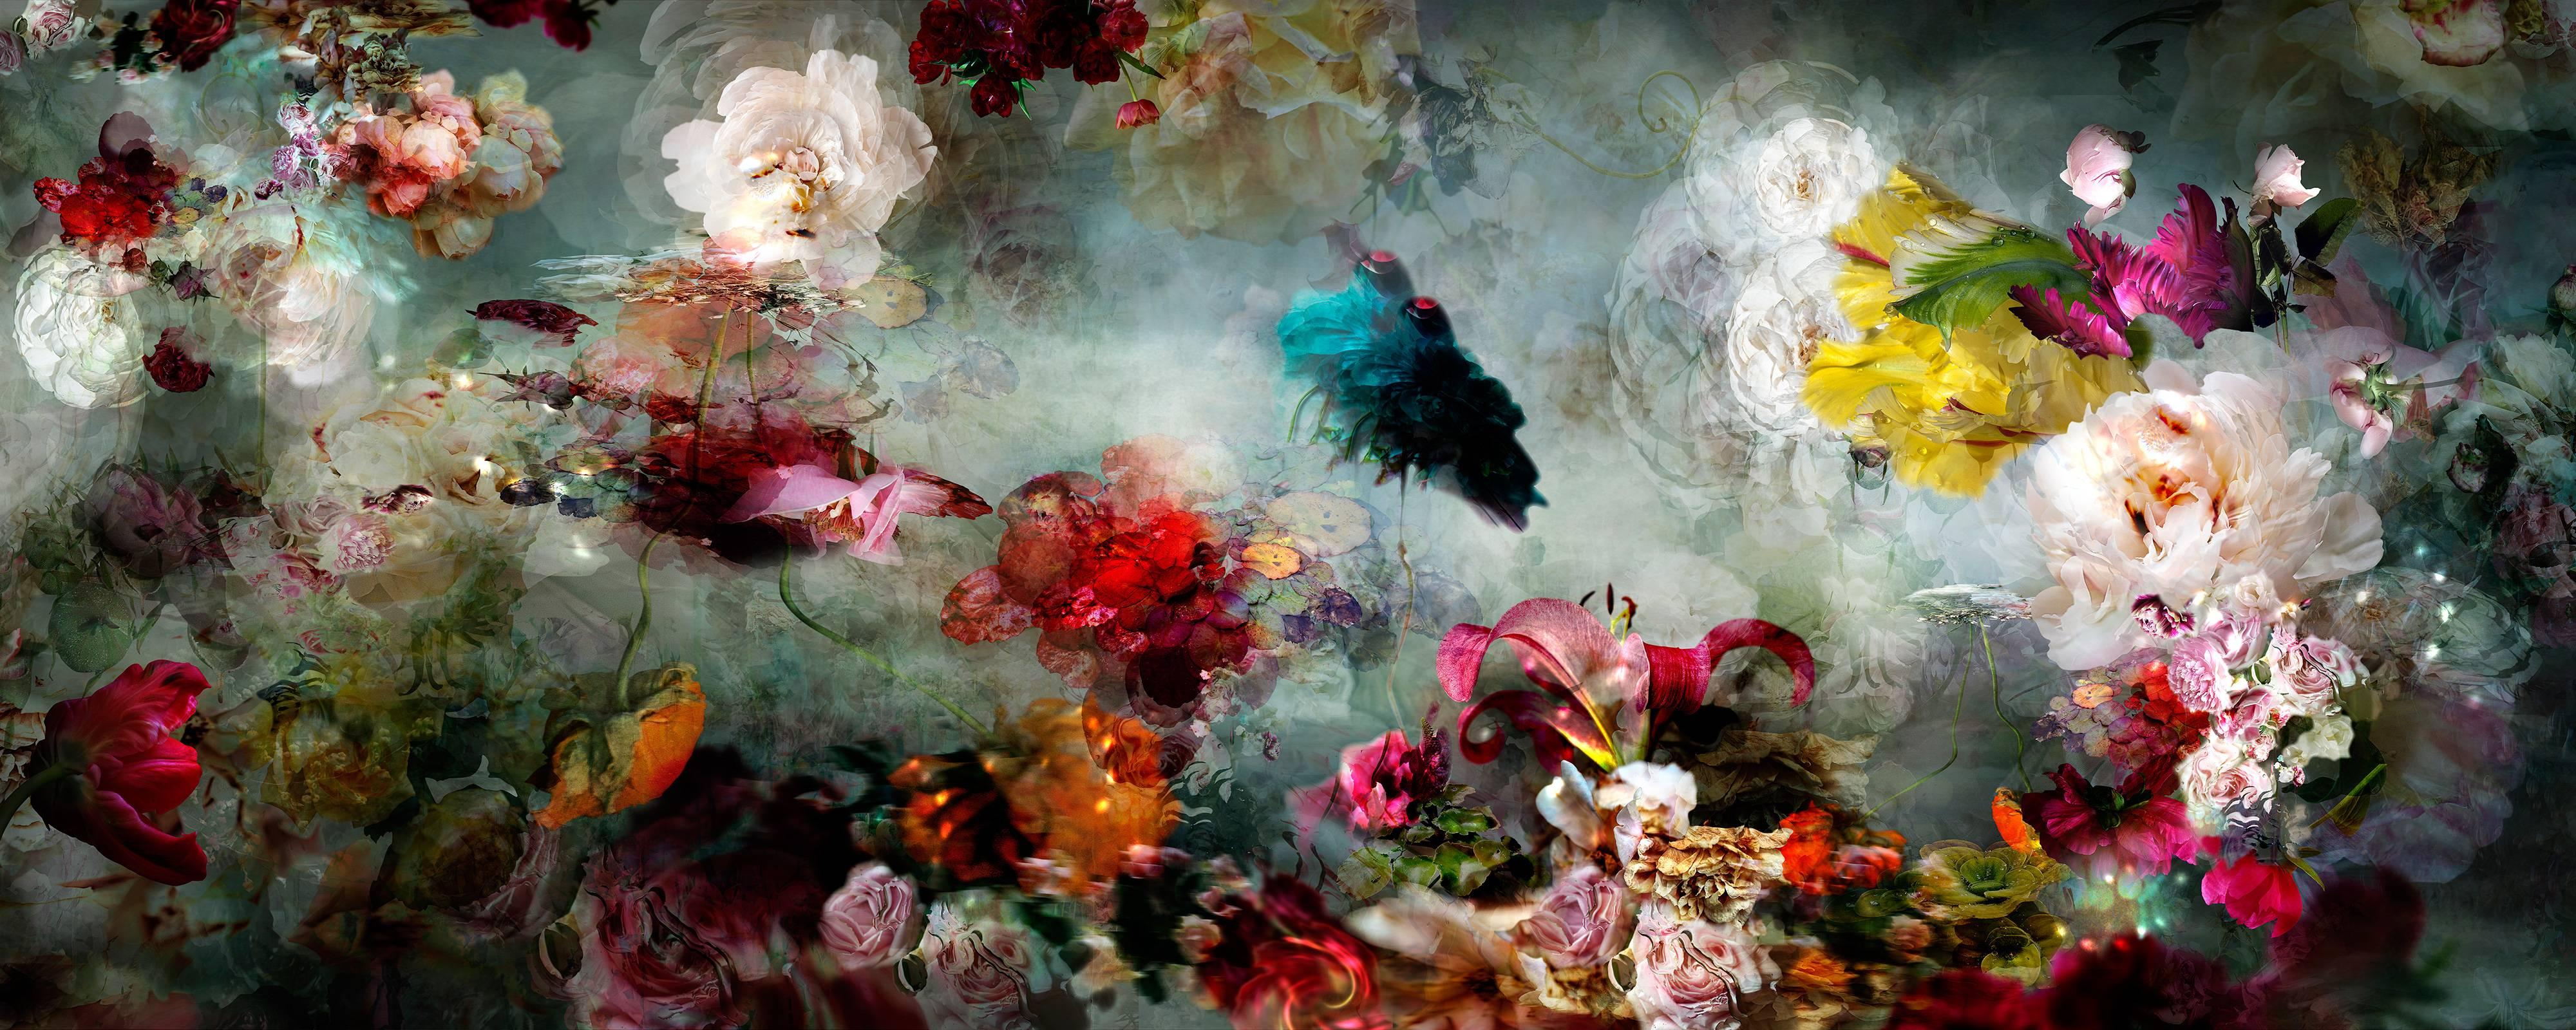 Isabelle Menin Landscape Photograph - Song for dead heroes #3 large abstract floral landscape colorful photo